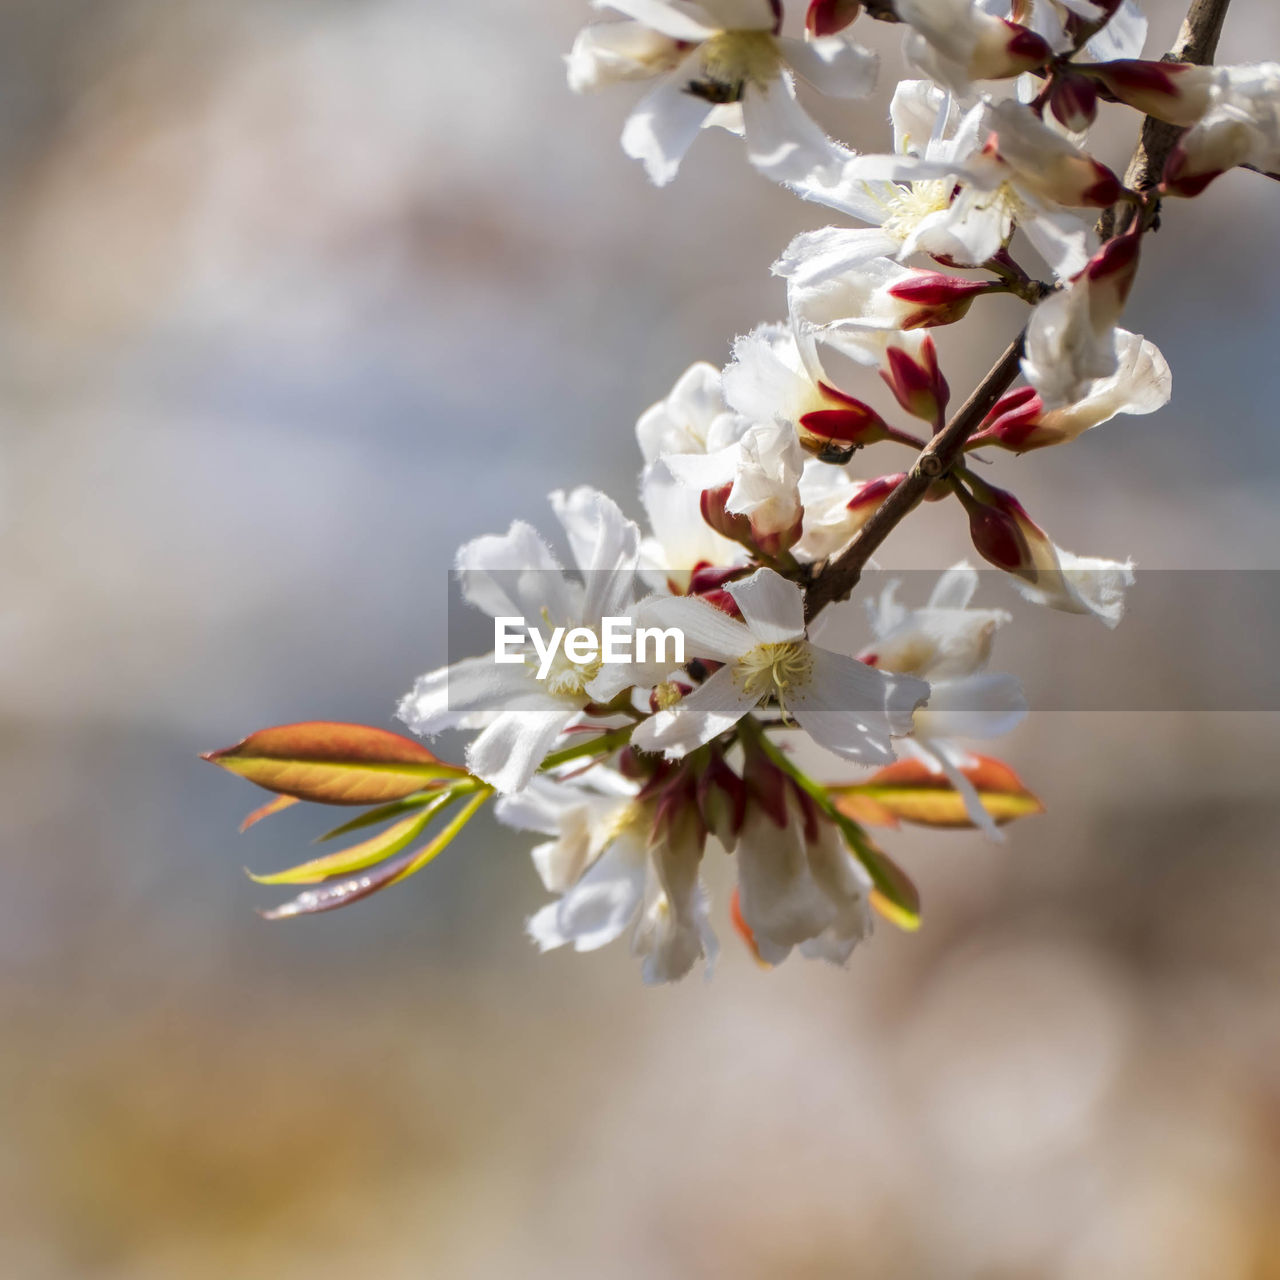 plant, flower, flowering plant, freshness, blossom, fragility, beauty in nature, springtime, tree, growth, nature, branch, close-up, spring, produce, macro photography, cherry blossom, focus on foreground, flower head, petal, twig, fruit tree, no people, food, white, outdoors, inflorescence, food and drink, botany, almond tree, selective focus, almond, pollen, day, fruit, cherry tree, stamen, pink, cherry, agriculture